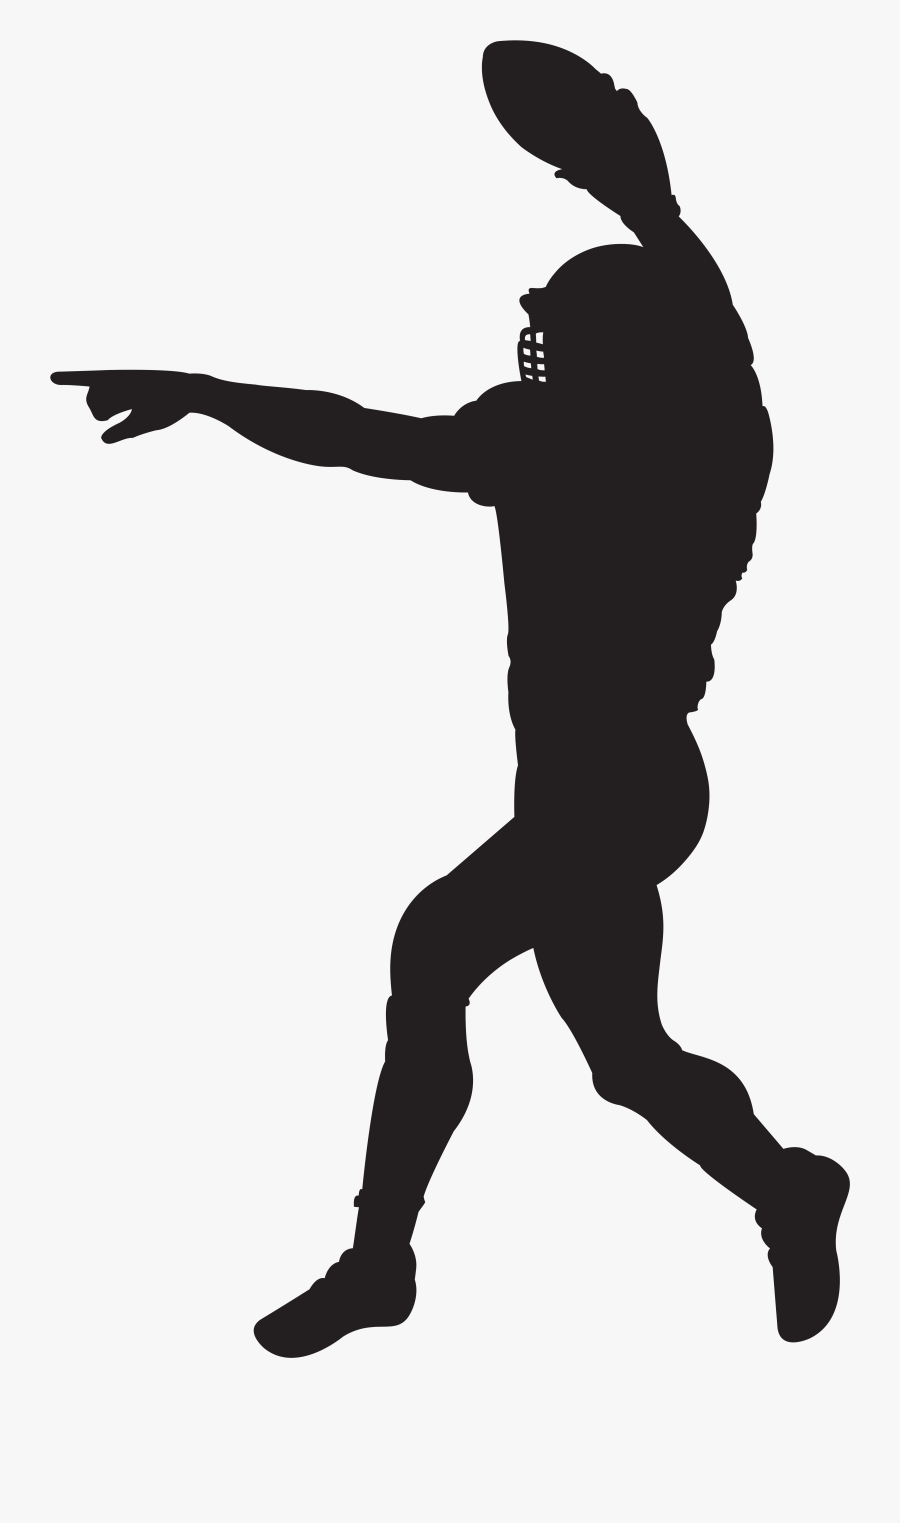 American Football Player Silhouette Clipart Image - Silhouette Football Player Png, Transparent Clipart